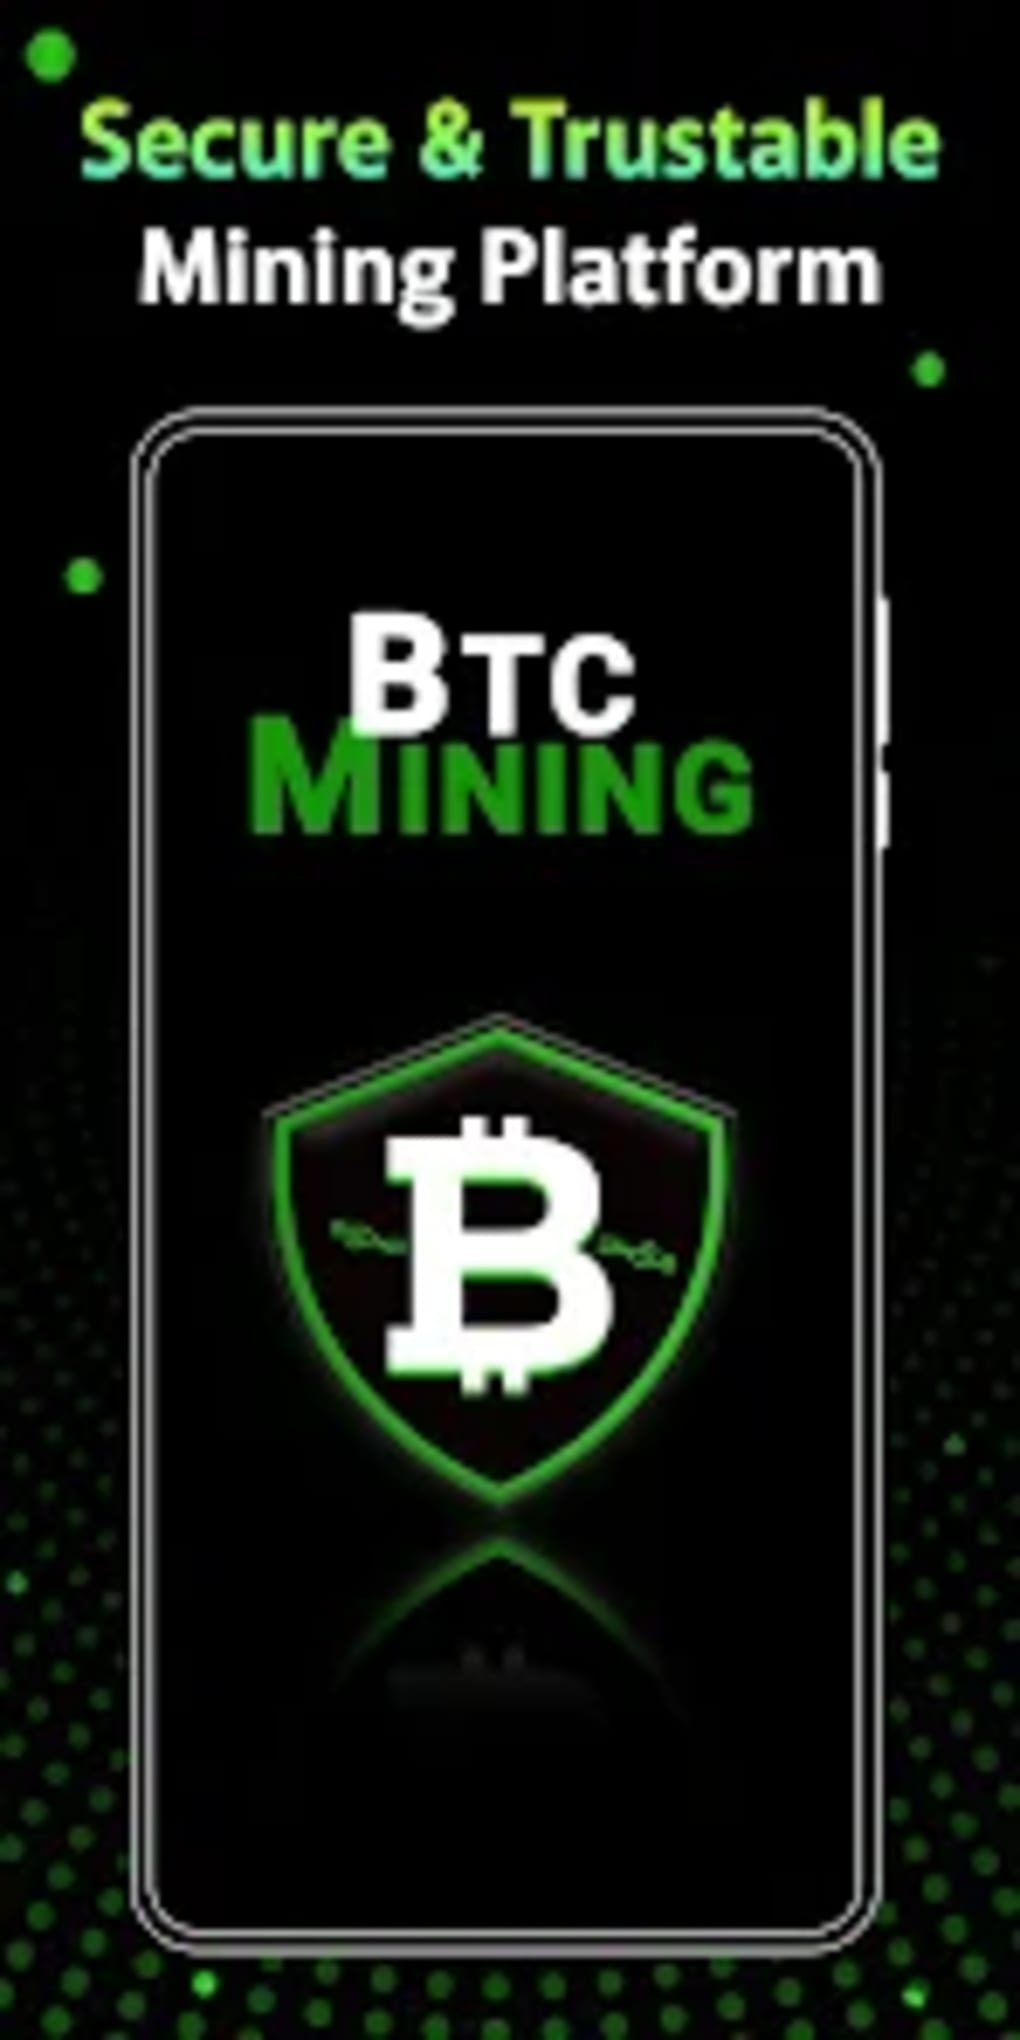 Bitcoin Cloud Mining Ad Earn for Android - Download